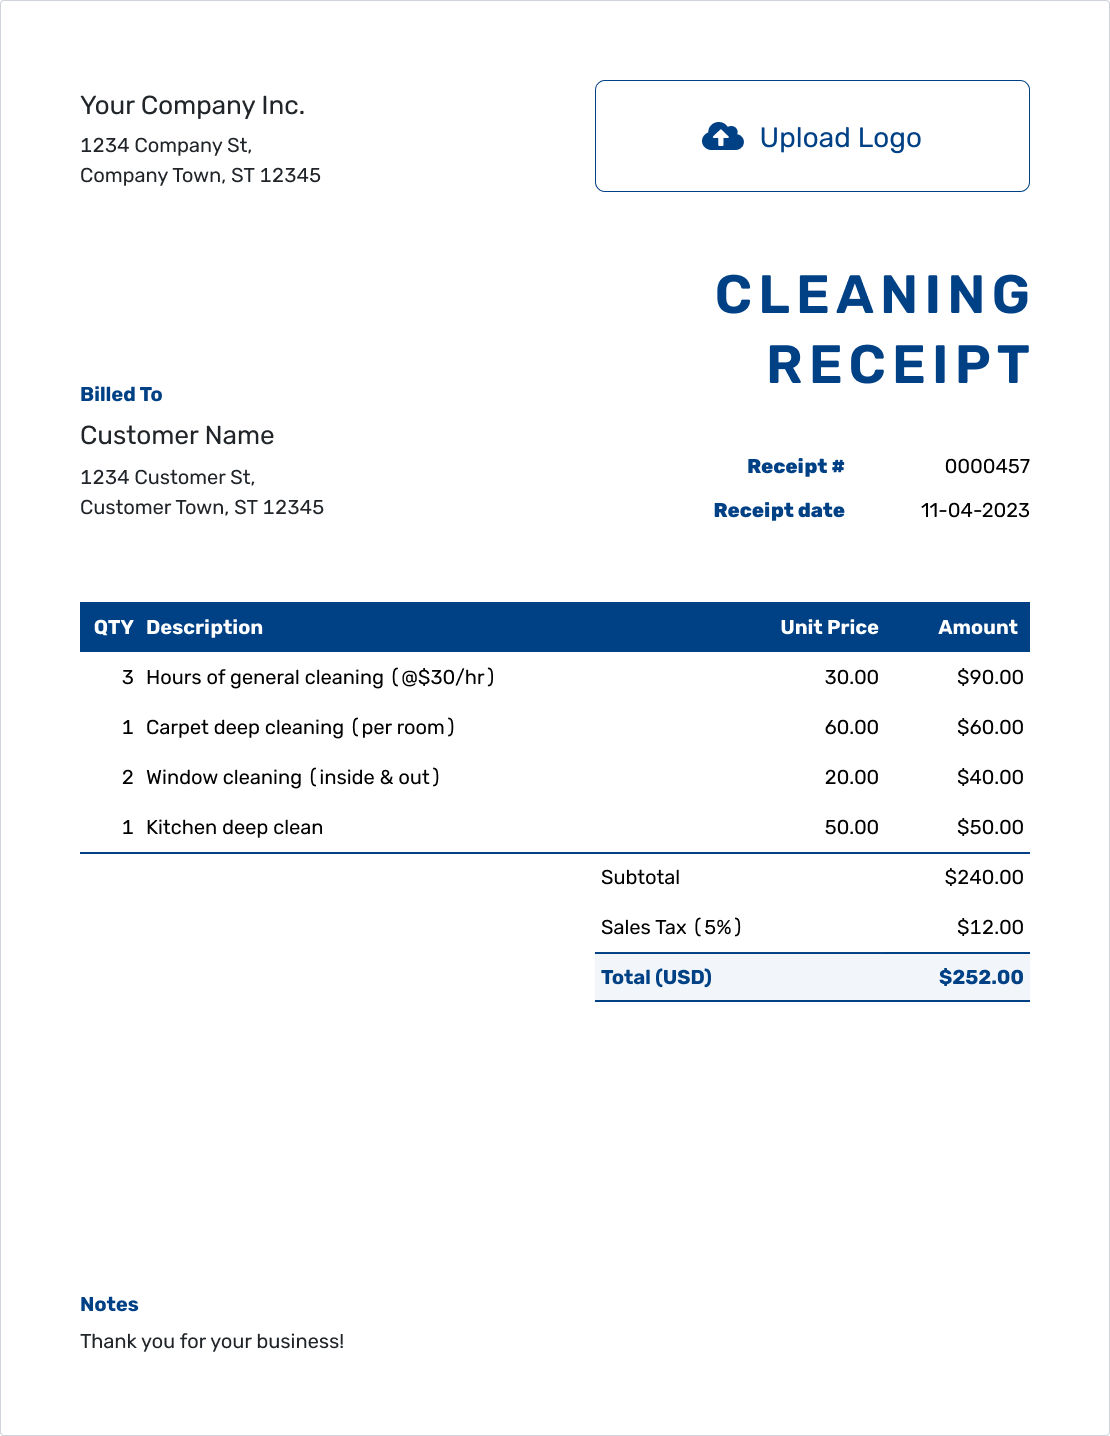 Sample Cleaning Receipt Template